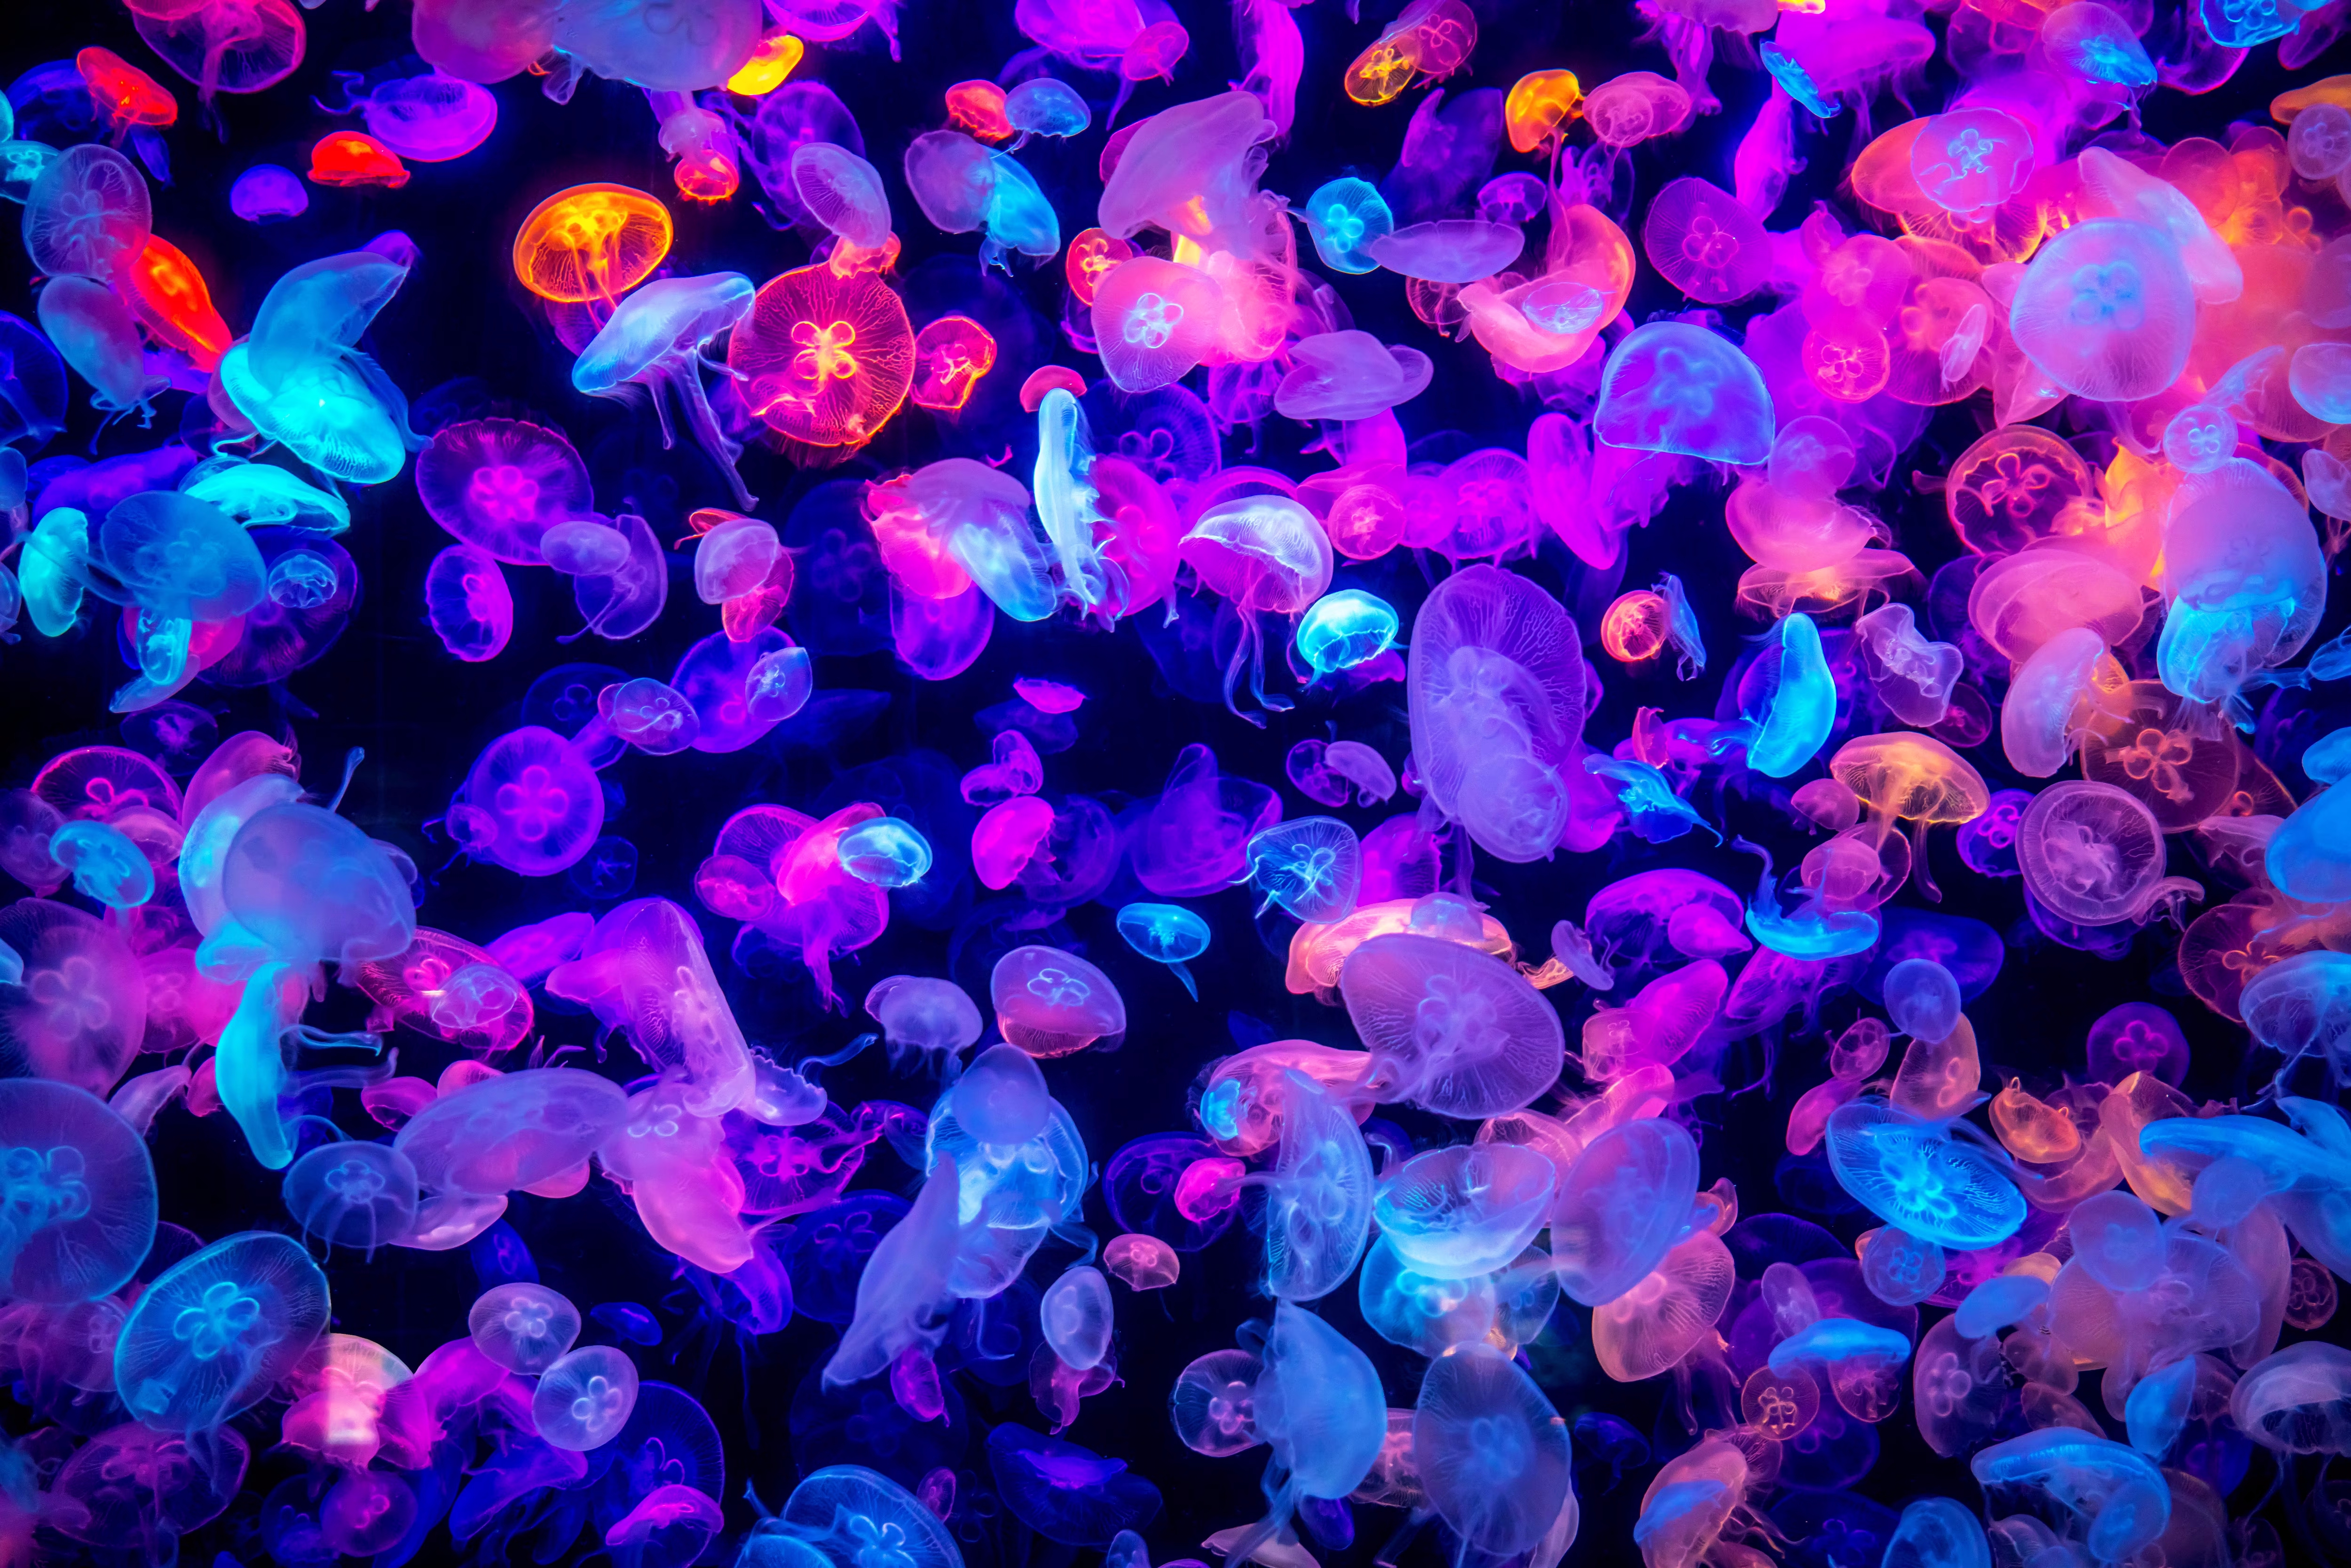 Jellyfish Swarm Of Jellyfishes Colorful Underwater Glowing Pink Blue Neon Orange Turquoise 5000x3335